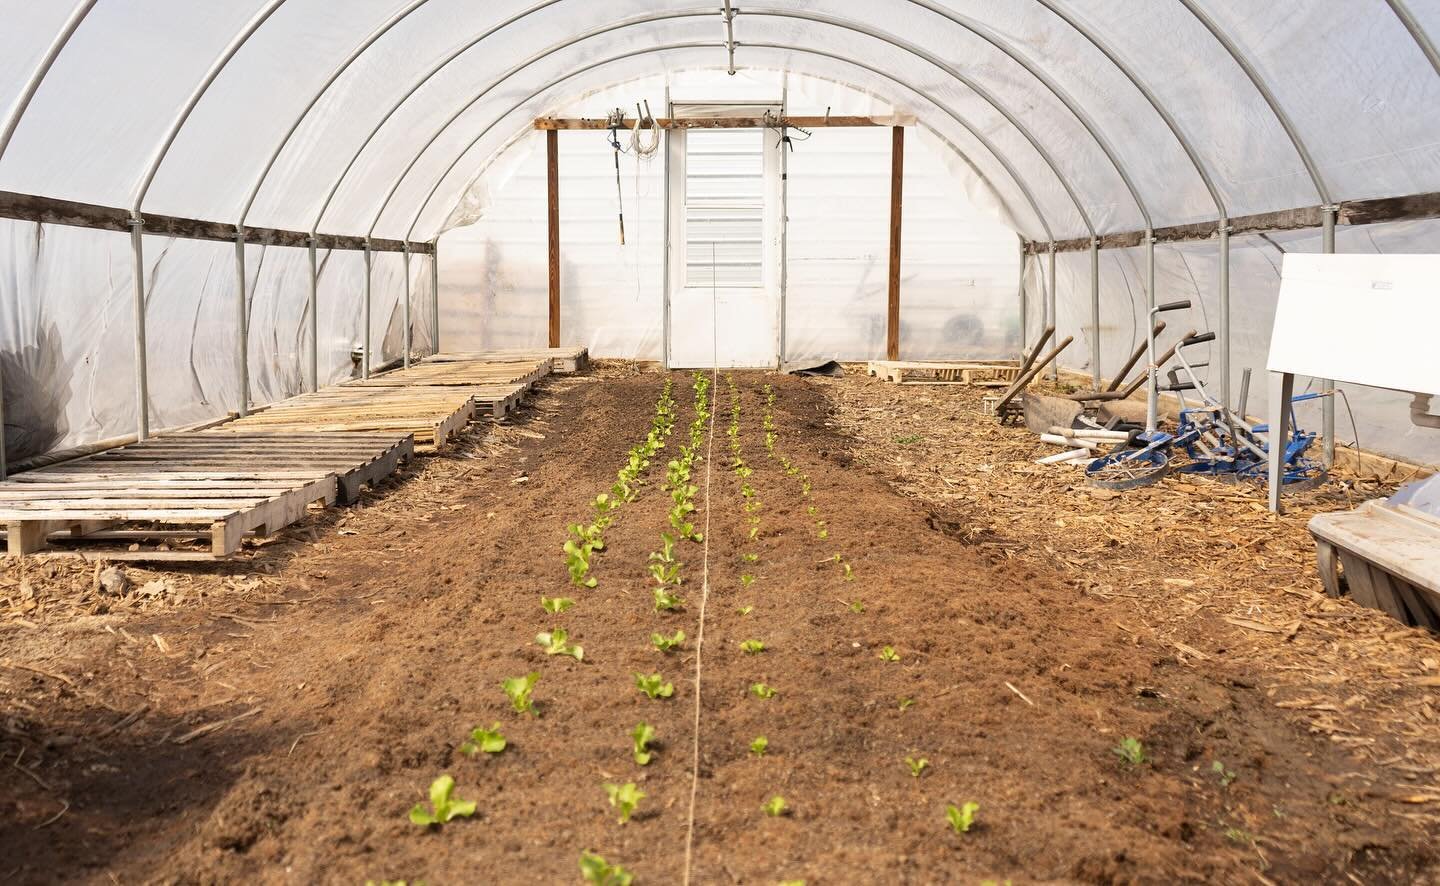 Check out this hoop house before and after. Why did some of our lettuce disappear? 

Well, we were reminded that rabbits also call the farm home. We planted lettuce in the hoop house to try for an earlier harvest and distribution to our partners this